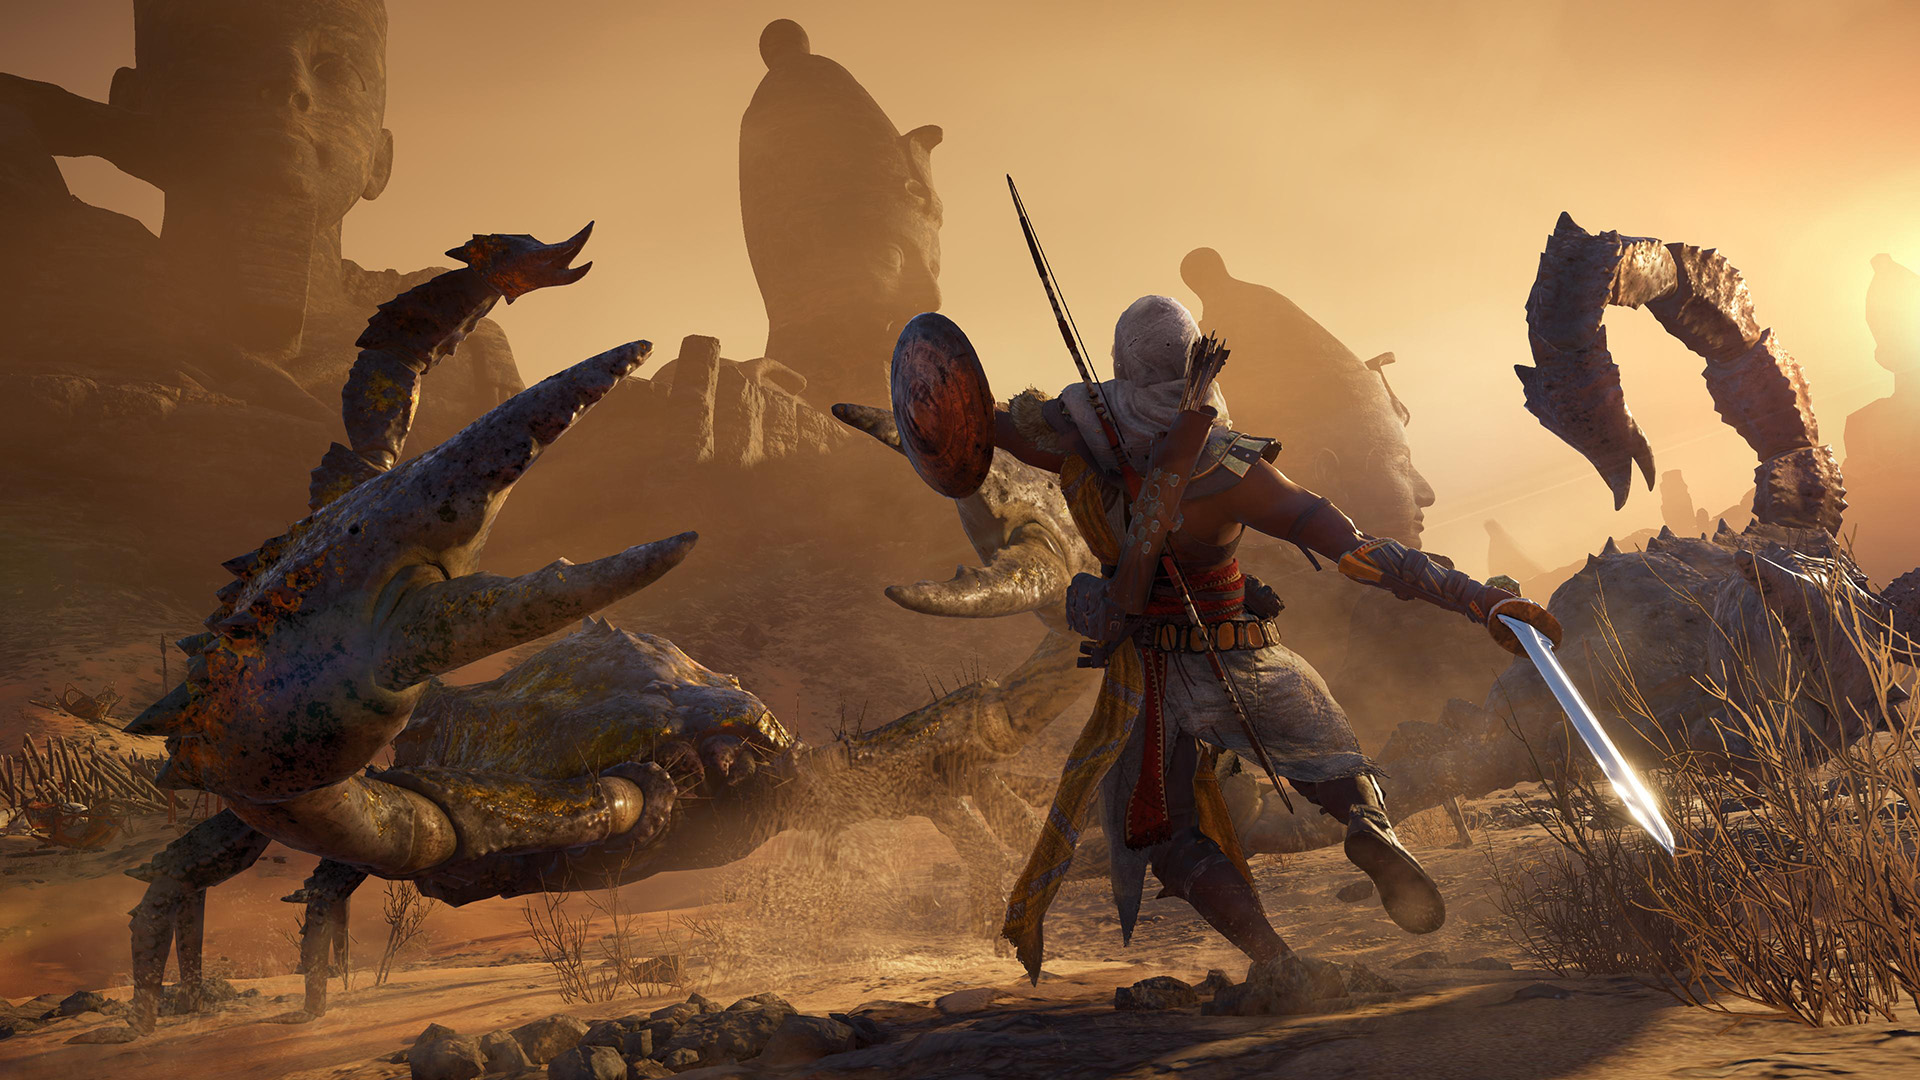 Assassin Creed Origins 1.20 Update Out Now, 3GB Download - Patch Notes Inside